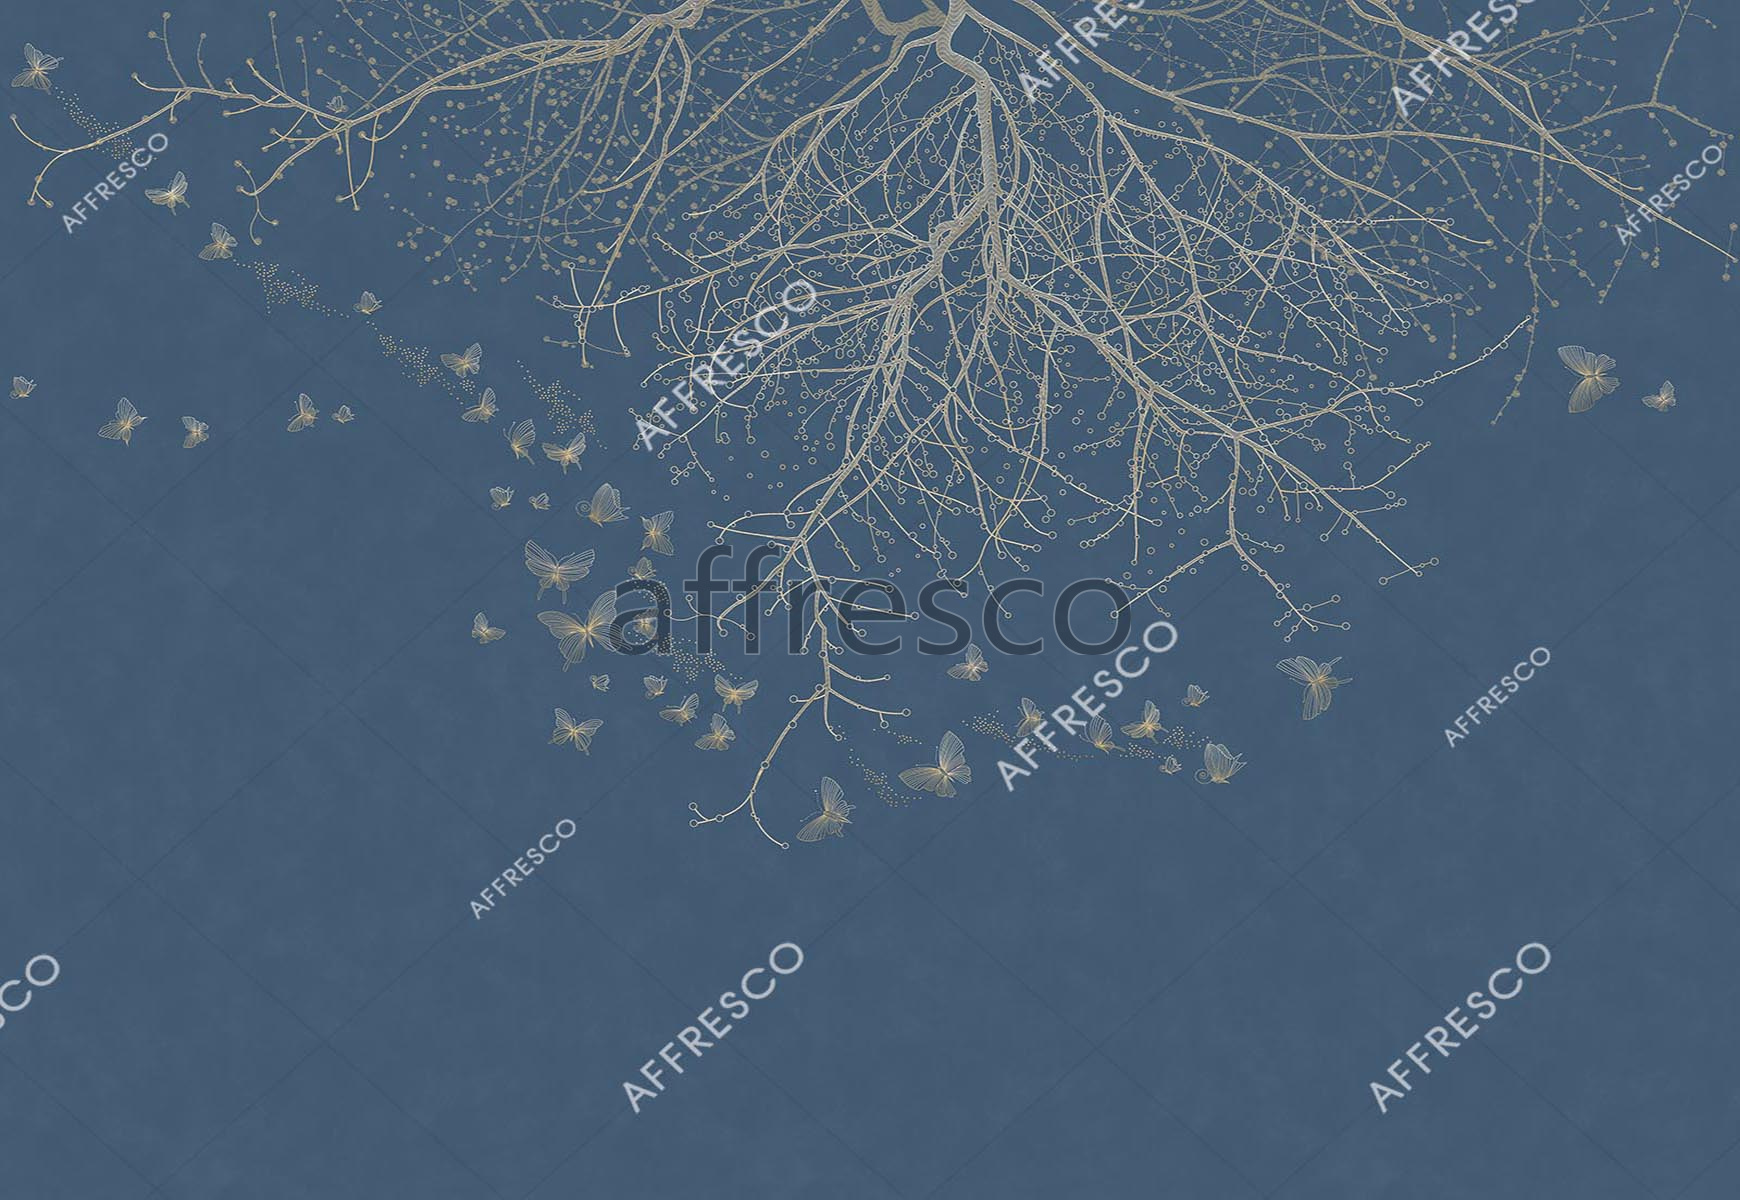 ID139249 | Forest | graphic branches and butterflies | Affresco Factory